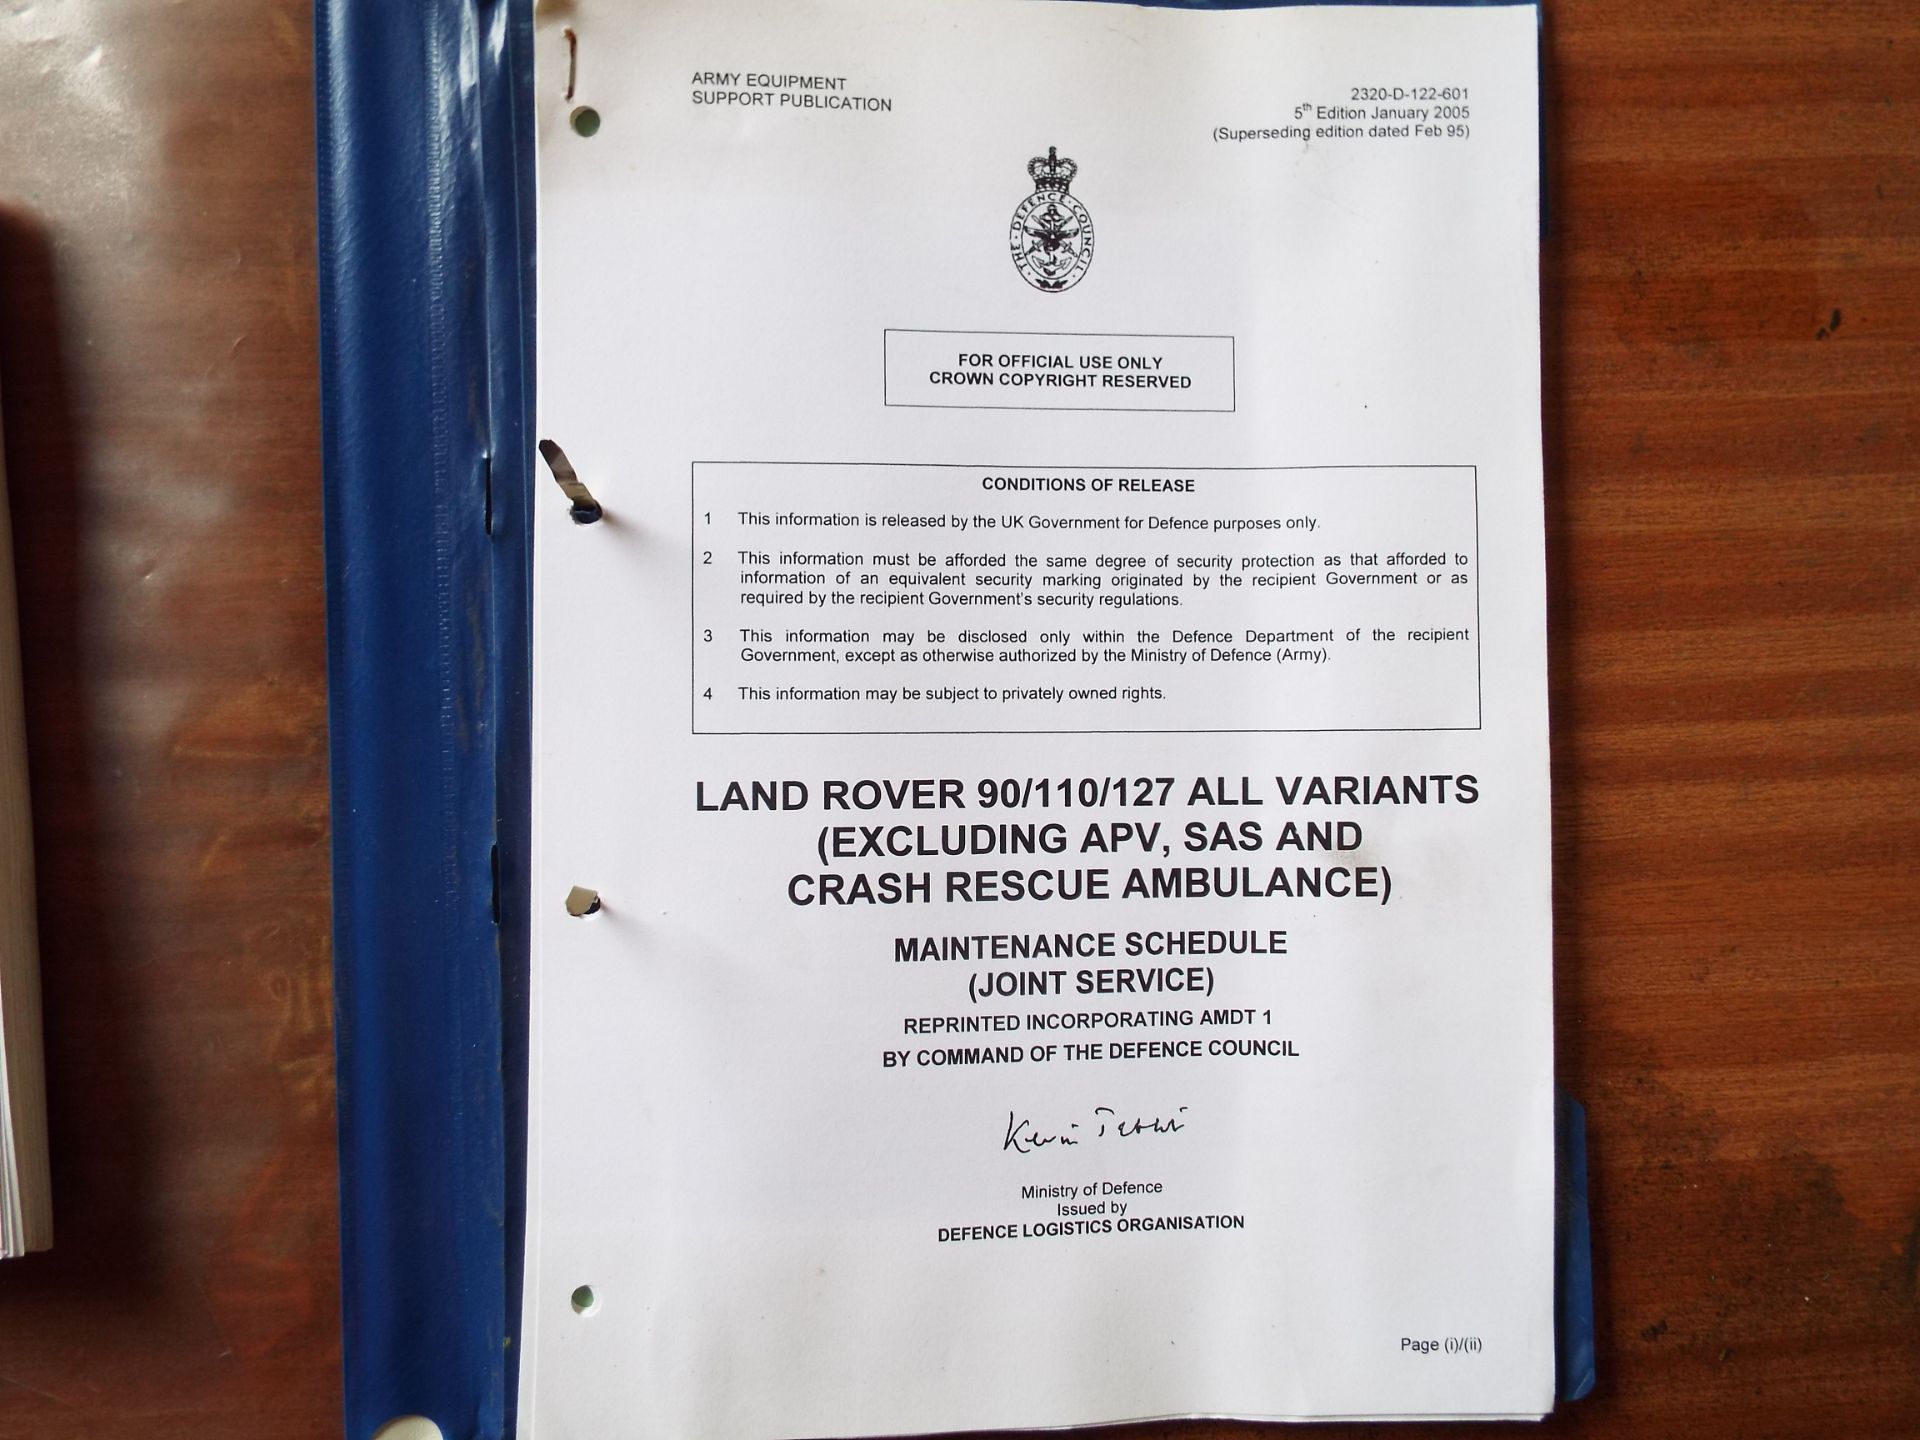 Extremely Rare Military Land Rover 90/110/127 Operating Manual with Maintenance Schedule - Image 7 of 8